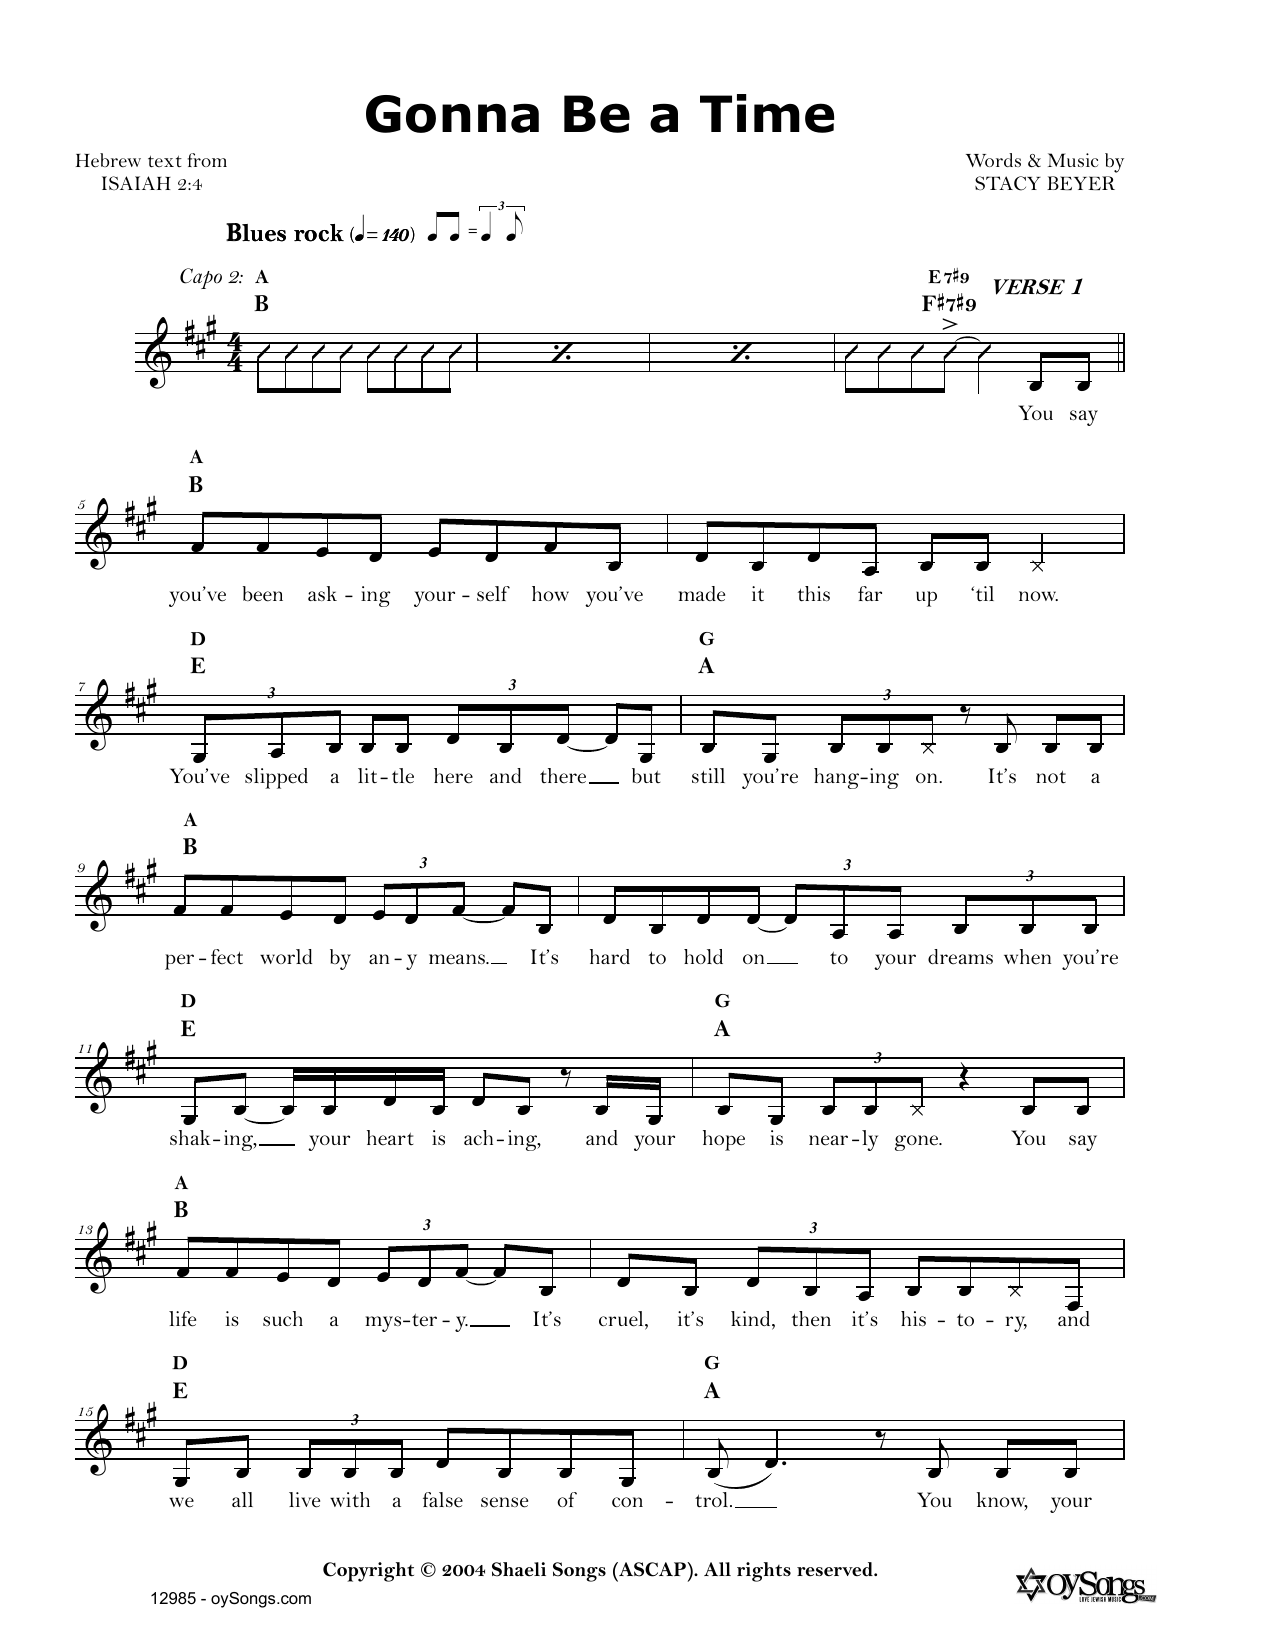 Download Stacy Beyer Gonna Be a Time Sheet Music